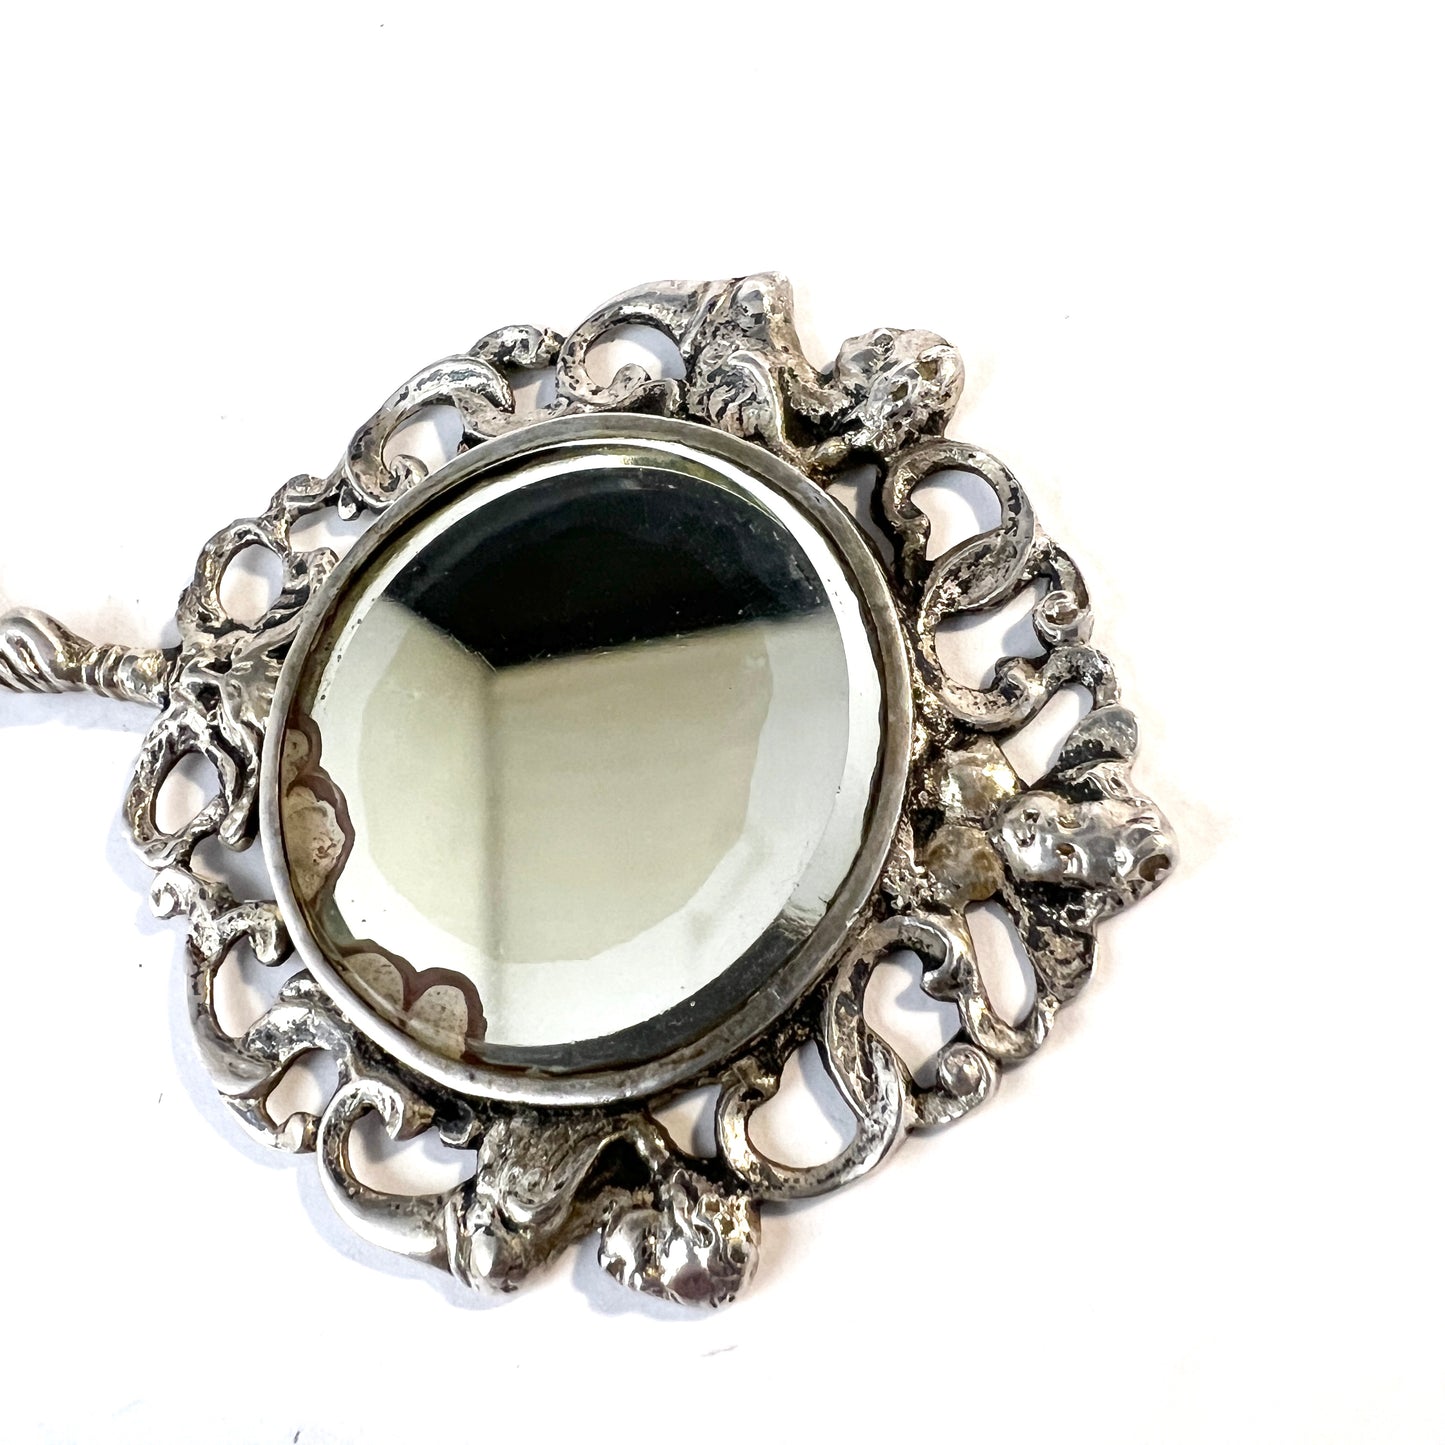 Austria-Hungary 1891-1901. Antique Solid Silver Ring Finger Mirror.